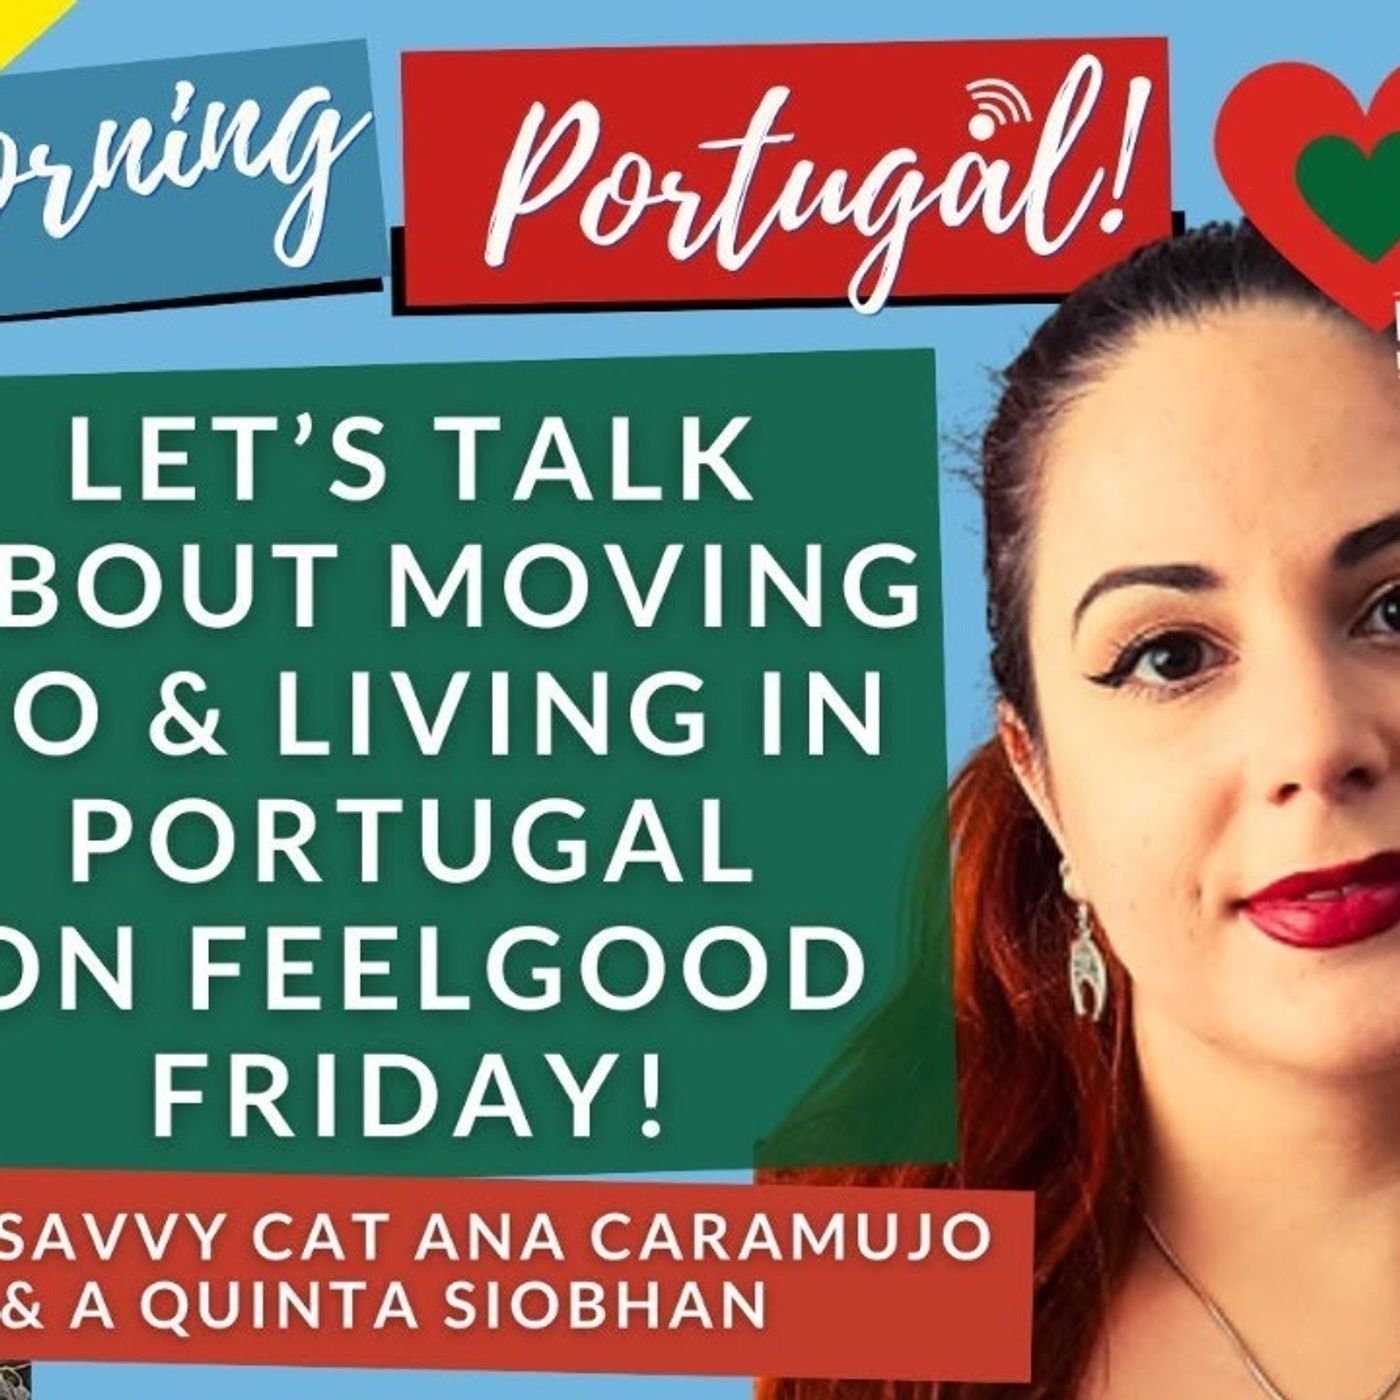 Let’s talk about moving to & living in Portugal on the Feelgood Friday GMP!